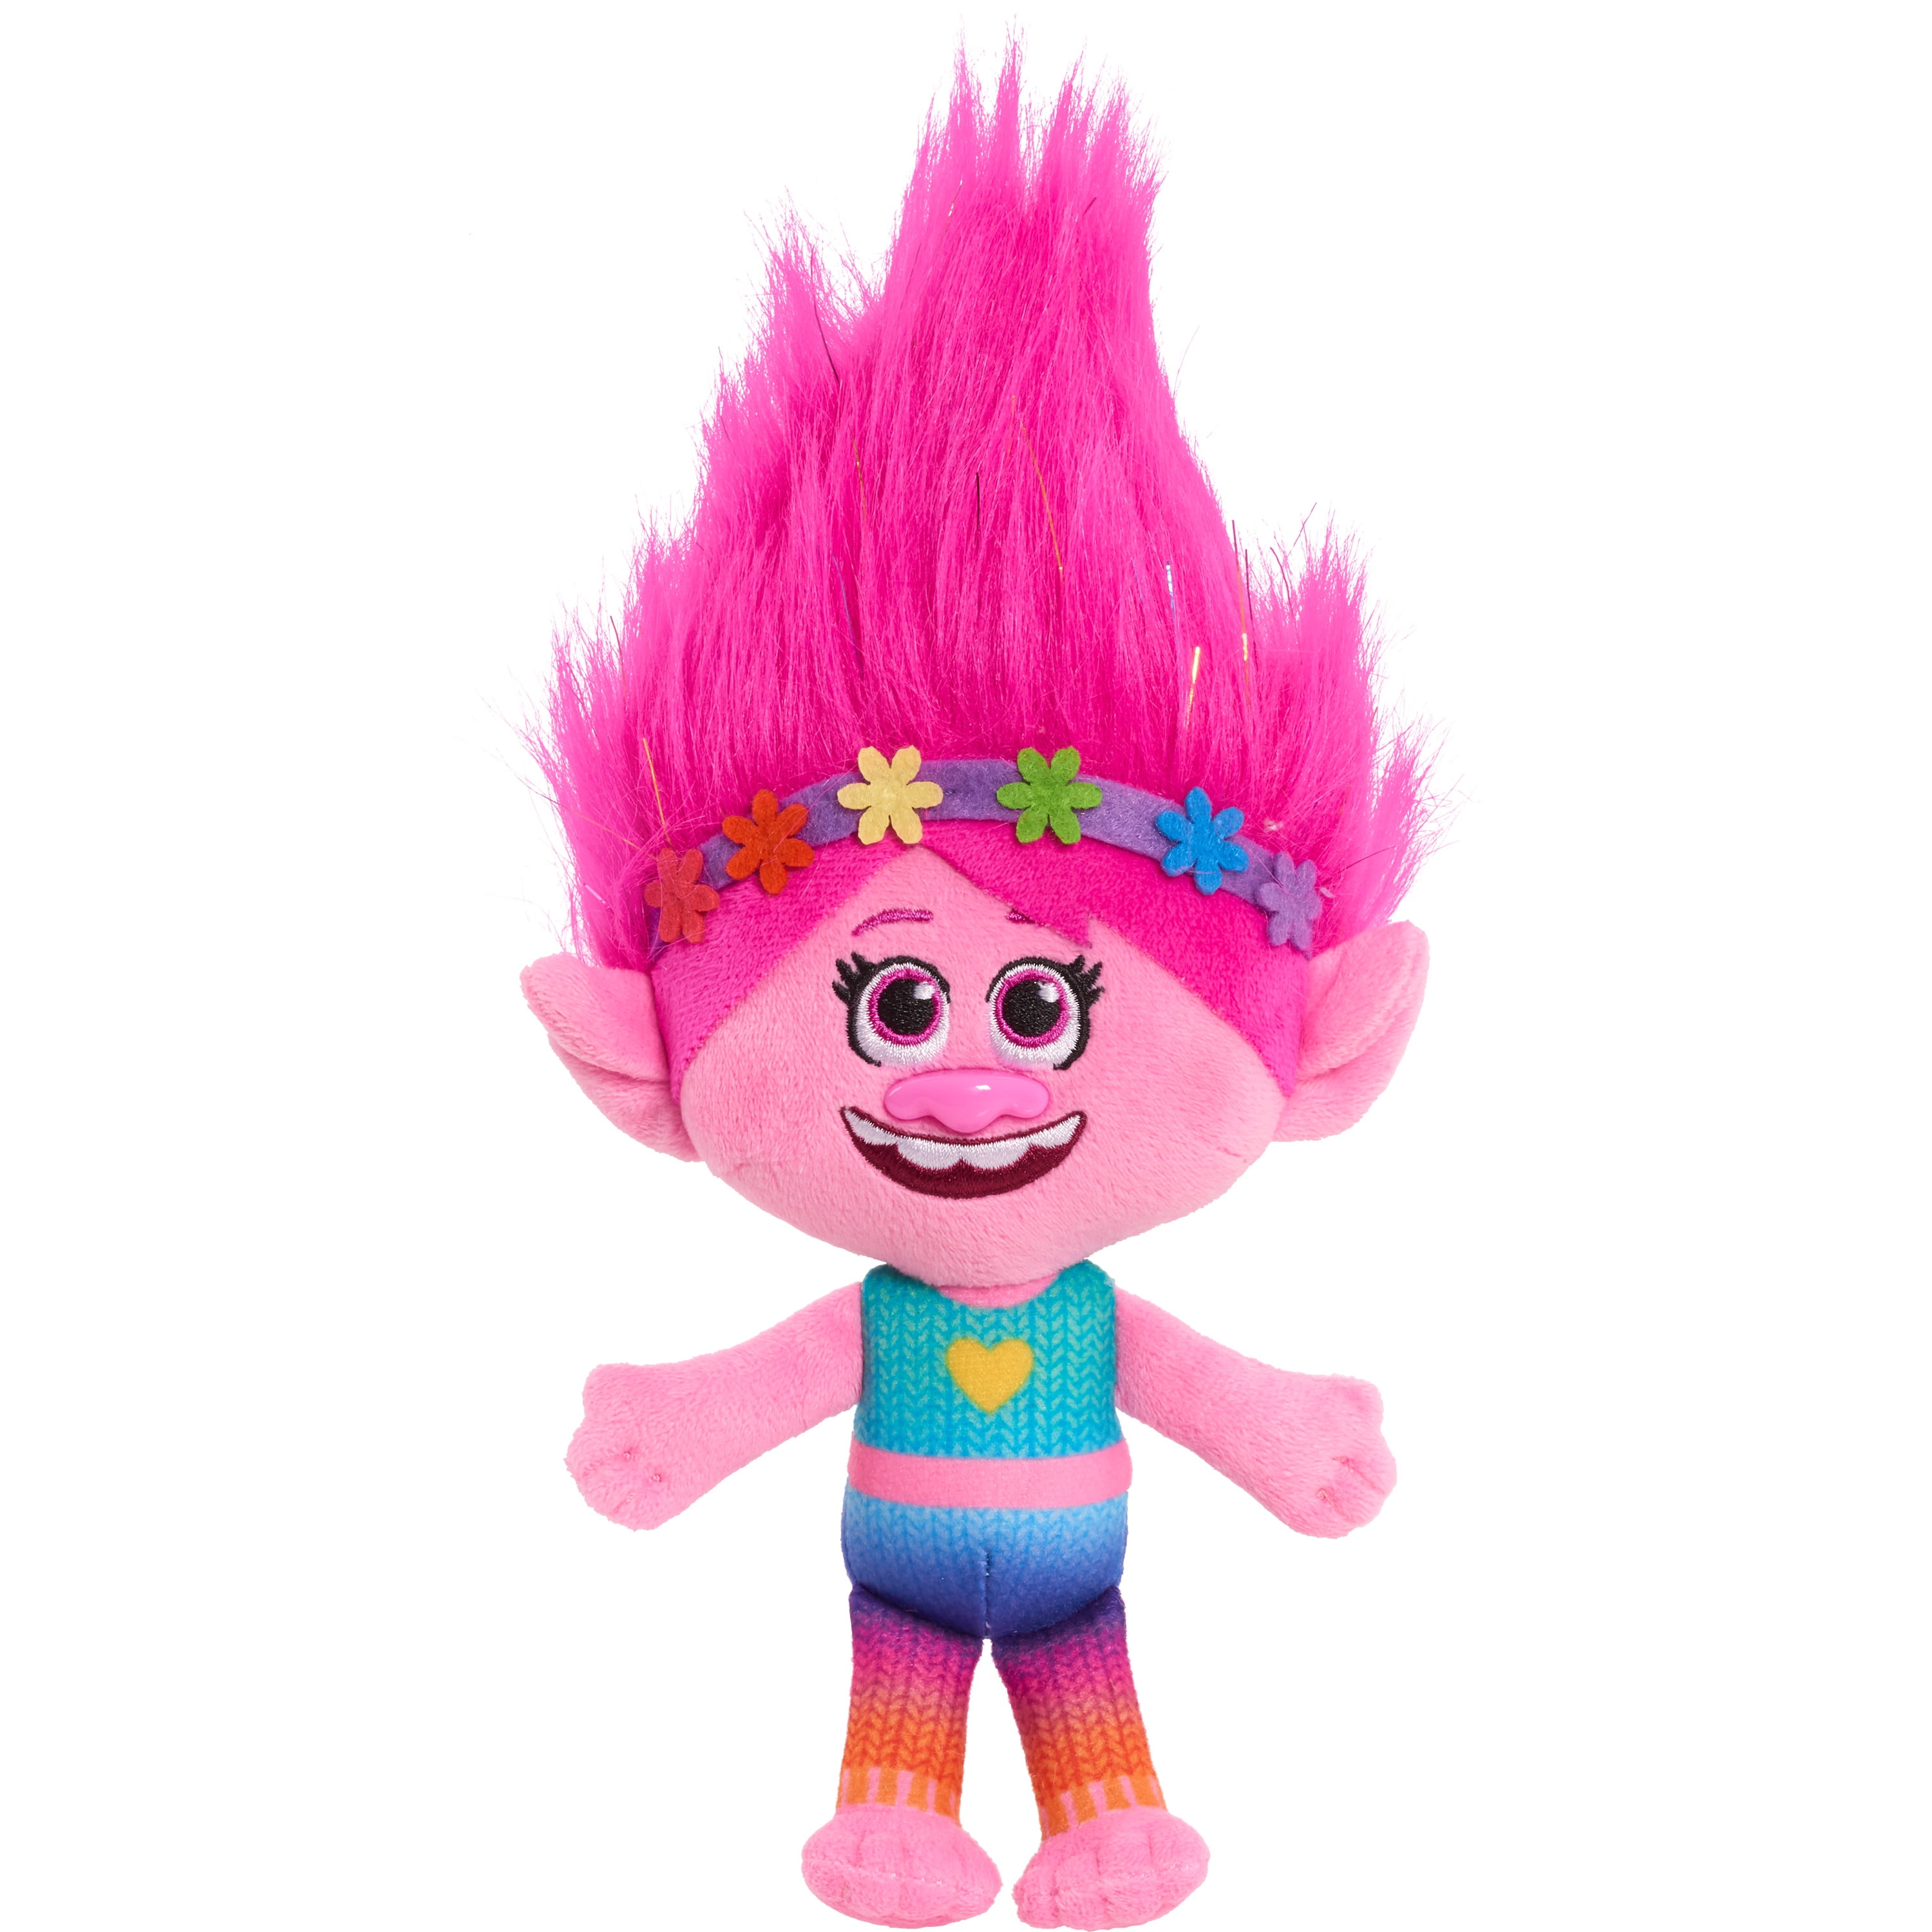 HASBRO TROLLS POPPY WIG PINK WITH BLUE & GREEN FLOWERS NEW IN BOX AGE 3+ 